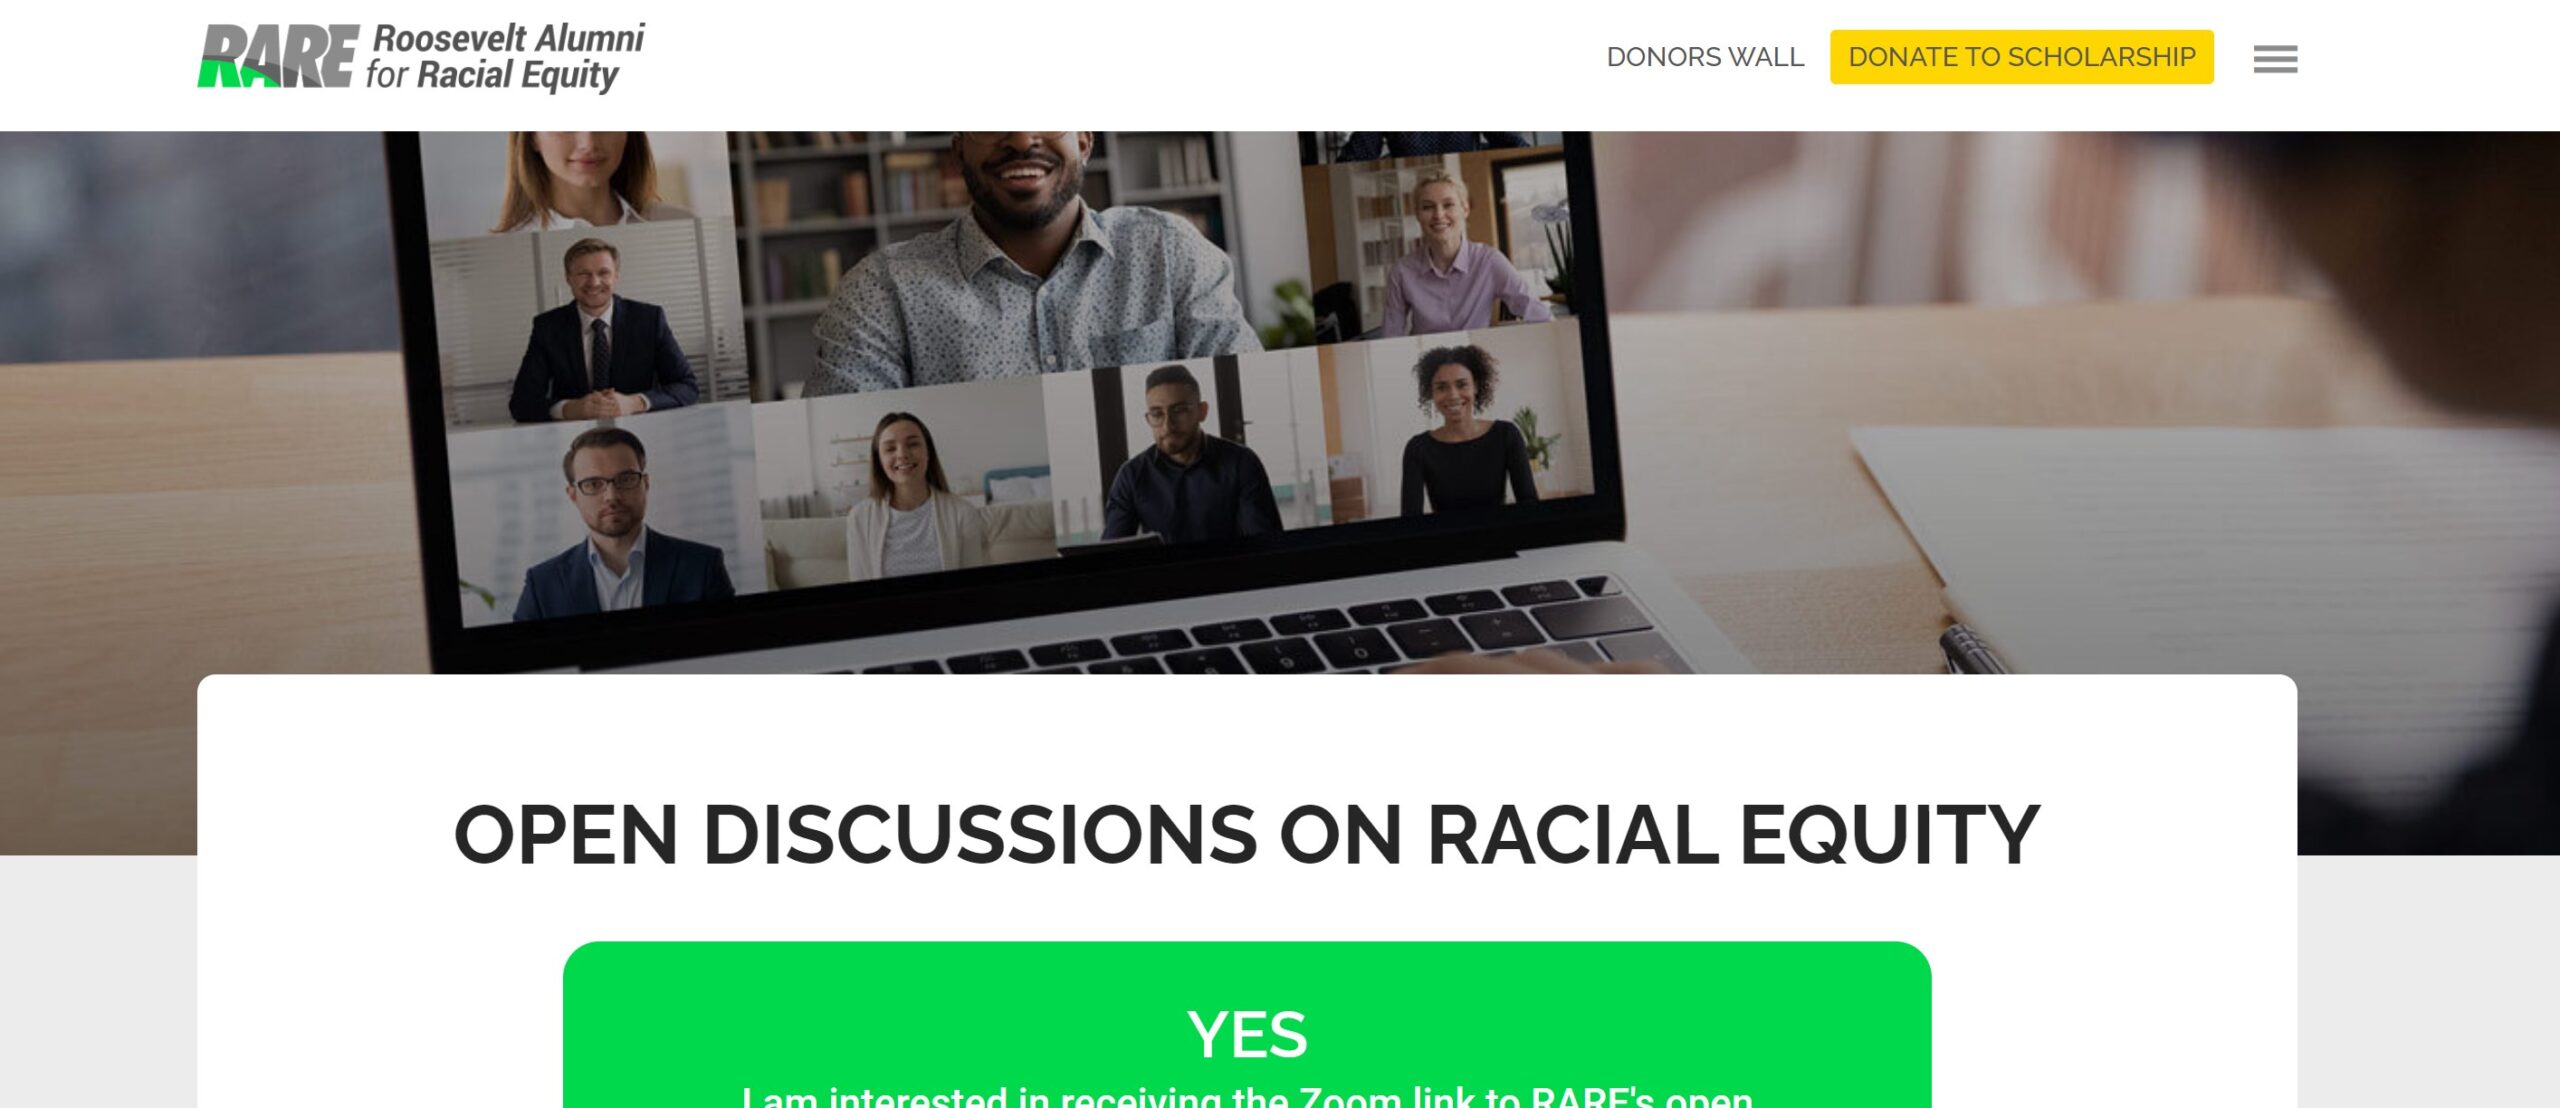 New Web Page Details Open Discussions on Race